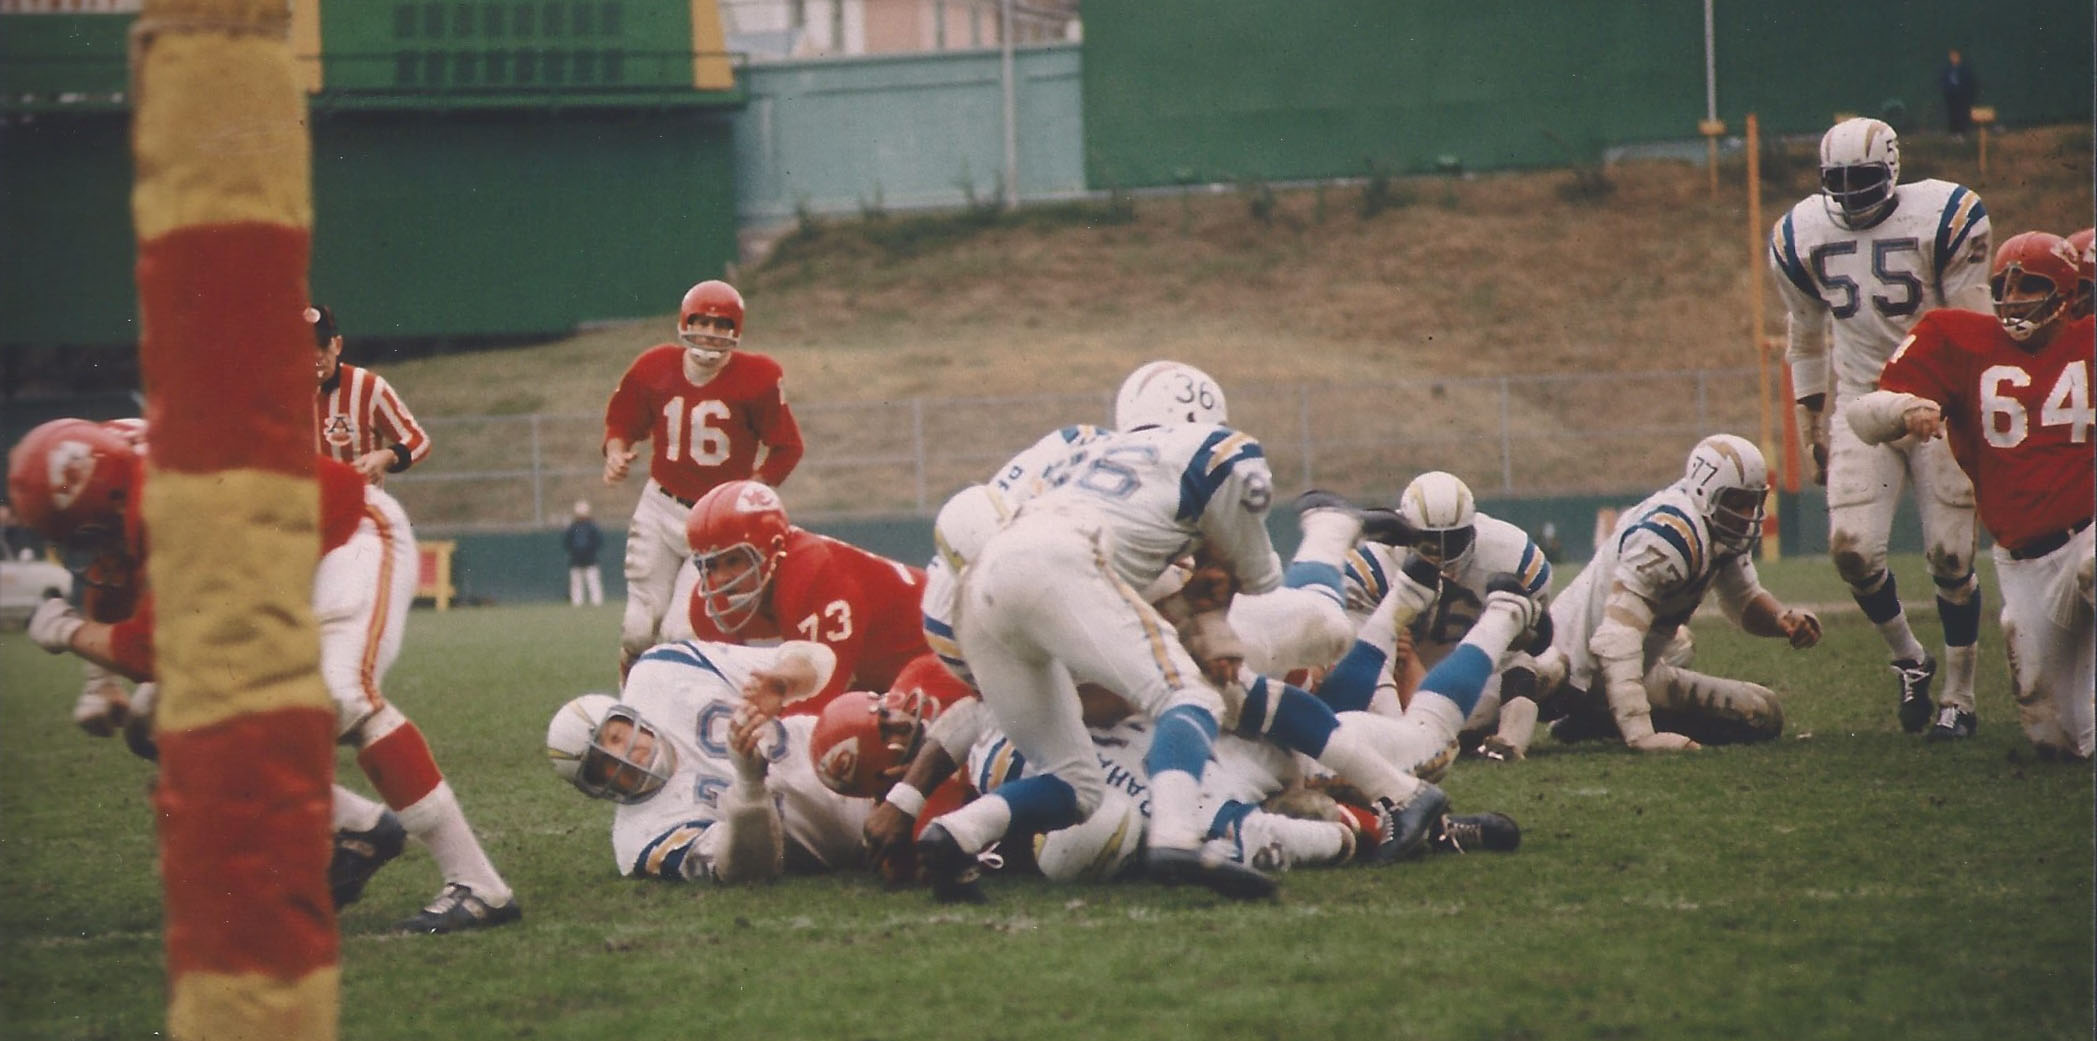 November 15, 1964 - The Chargers defense swarms over Chiefs running ...